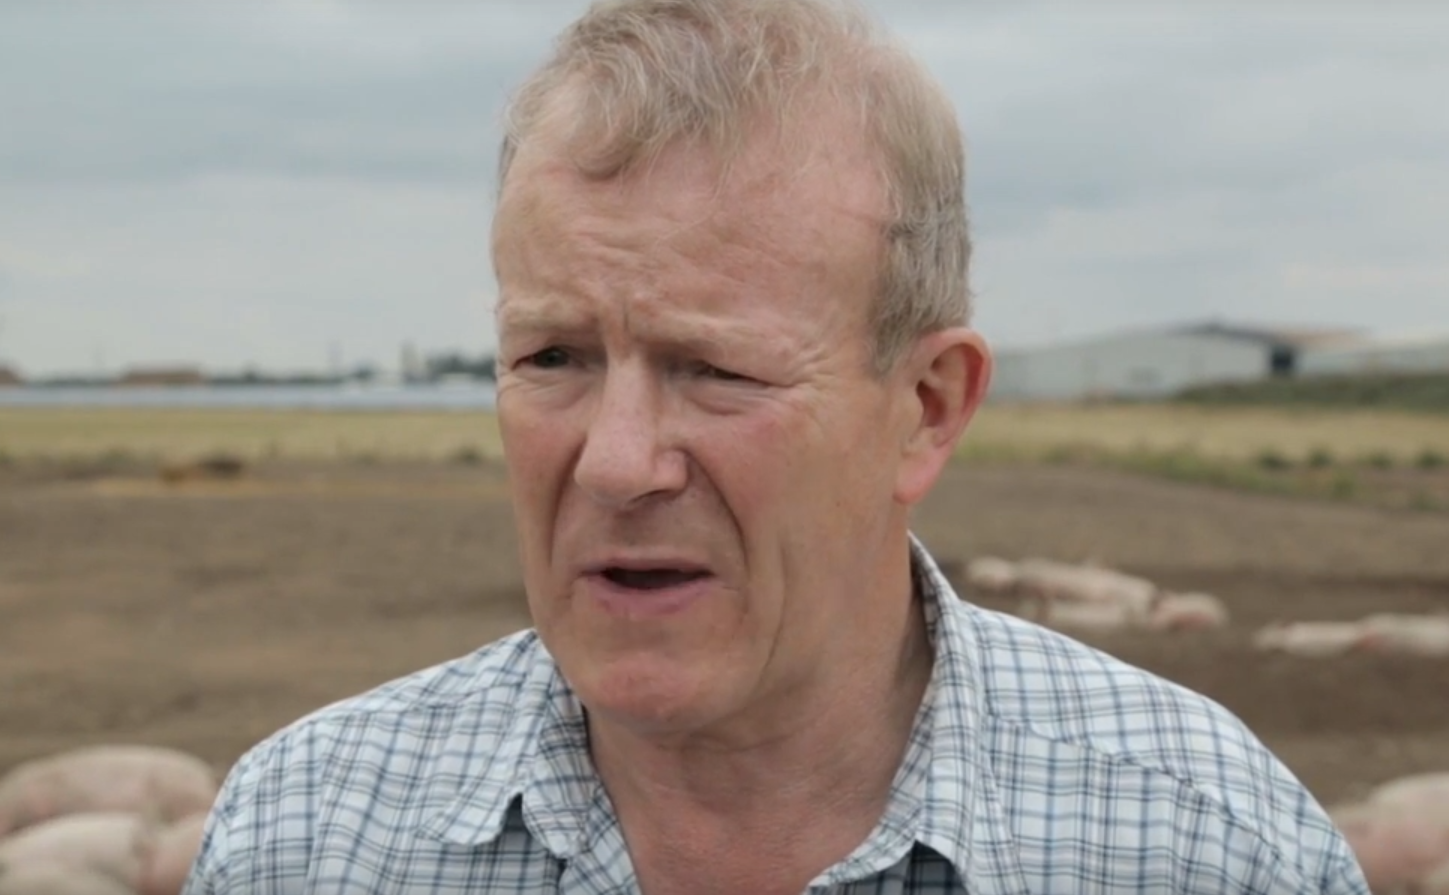 Current pig prices are ‘very encouraging’ according to pig farmer Richard Longthorp